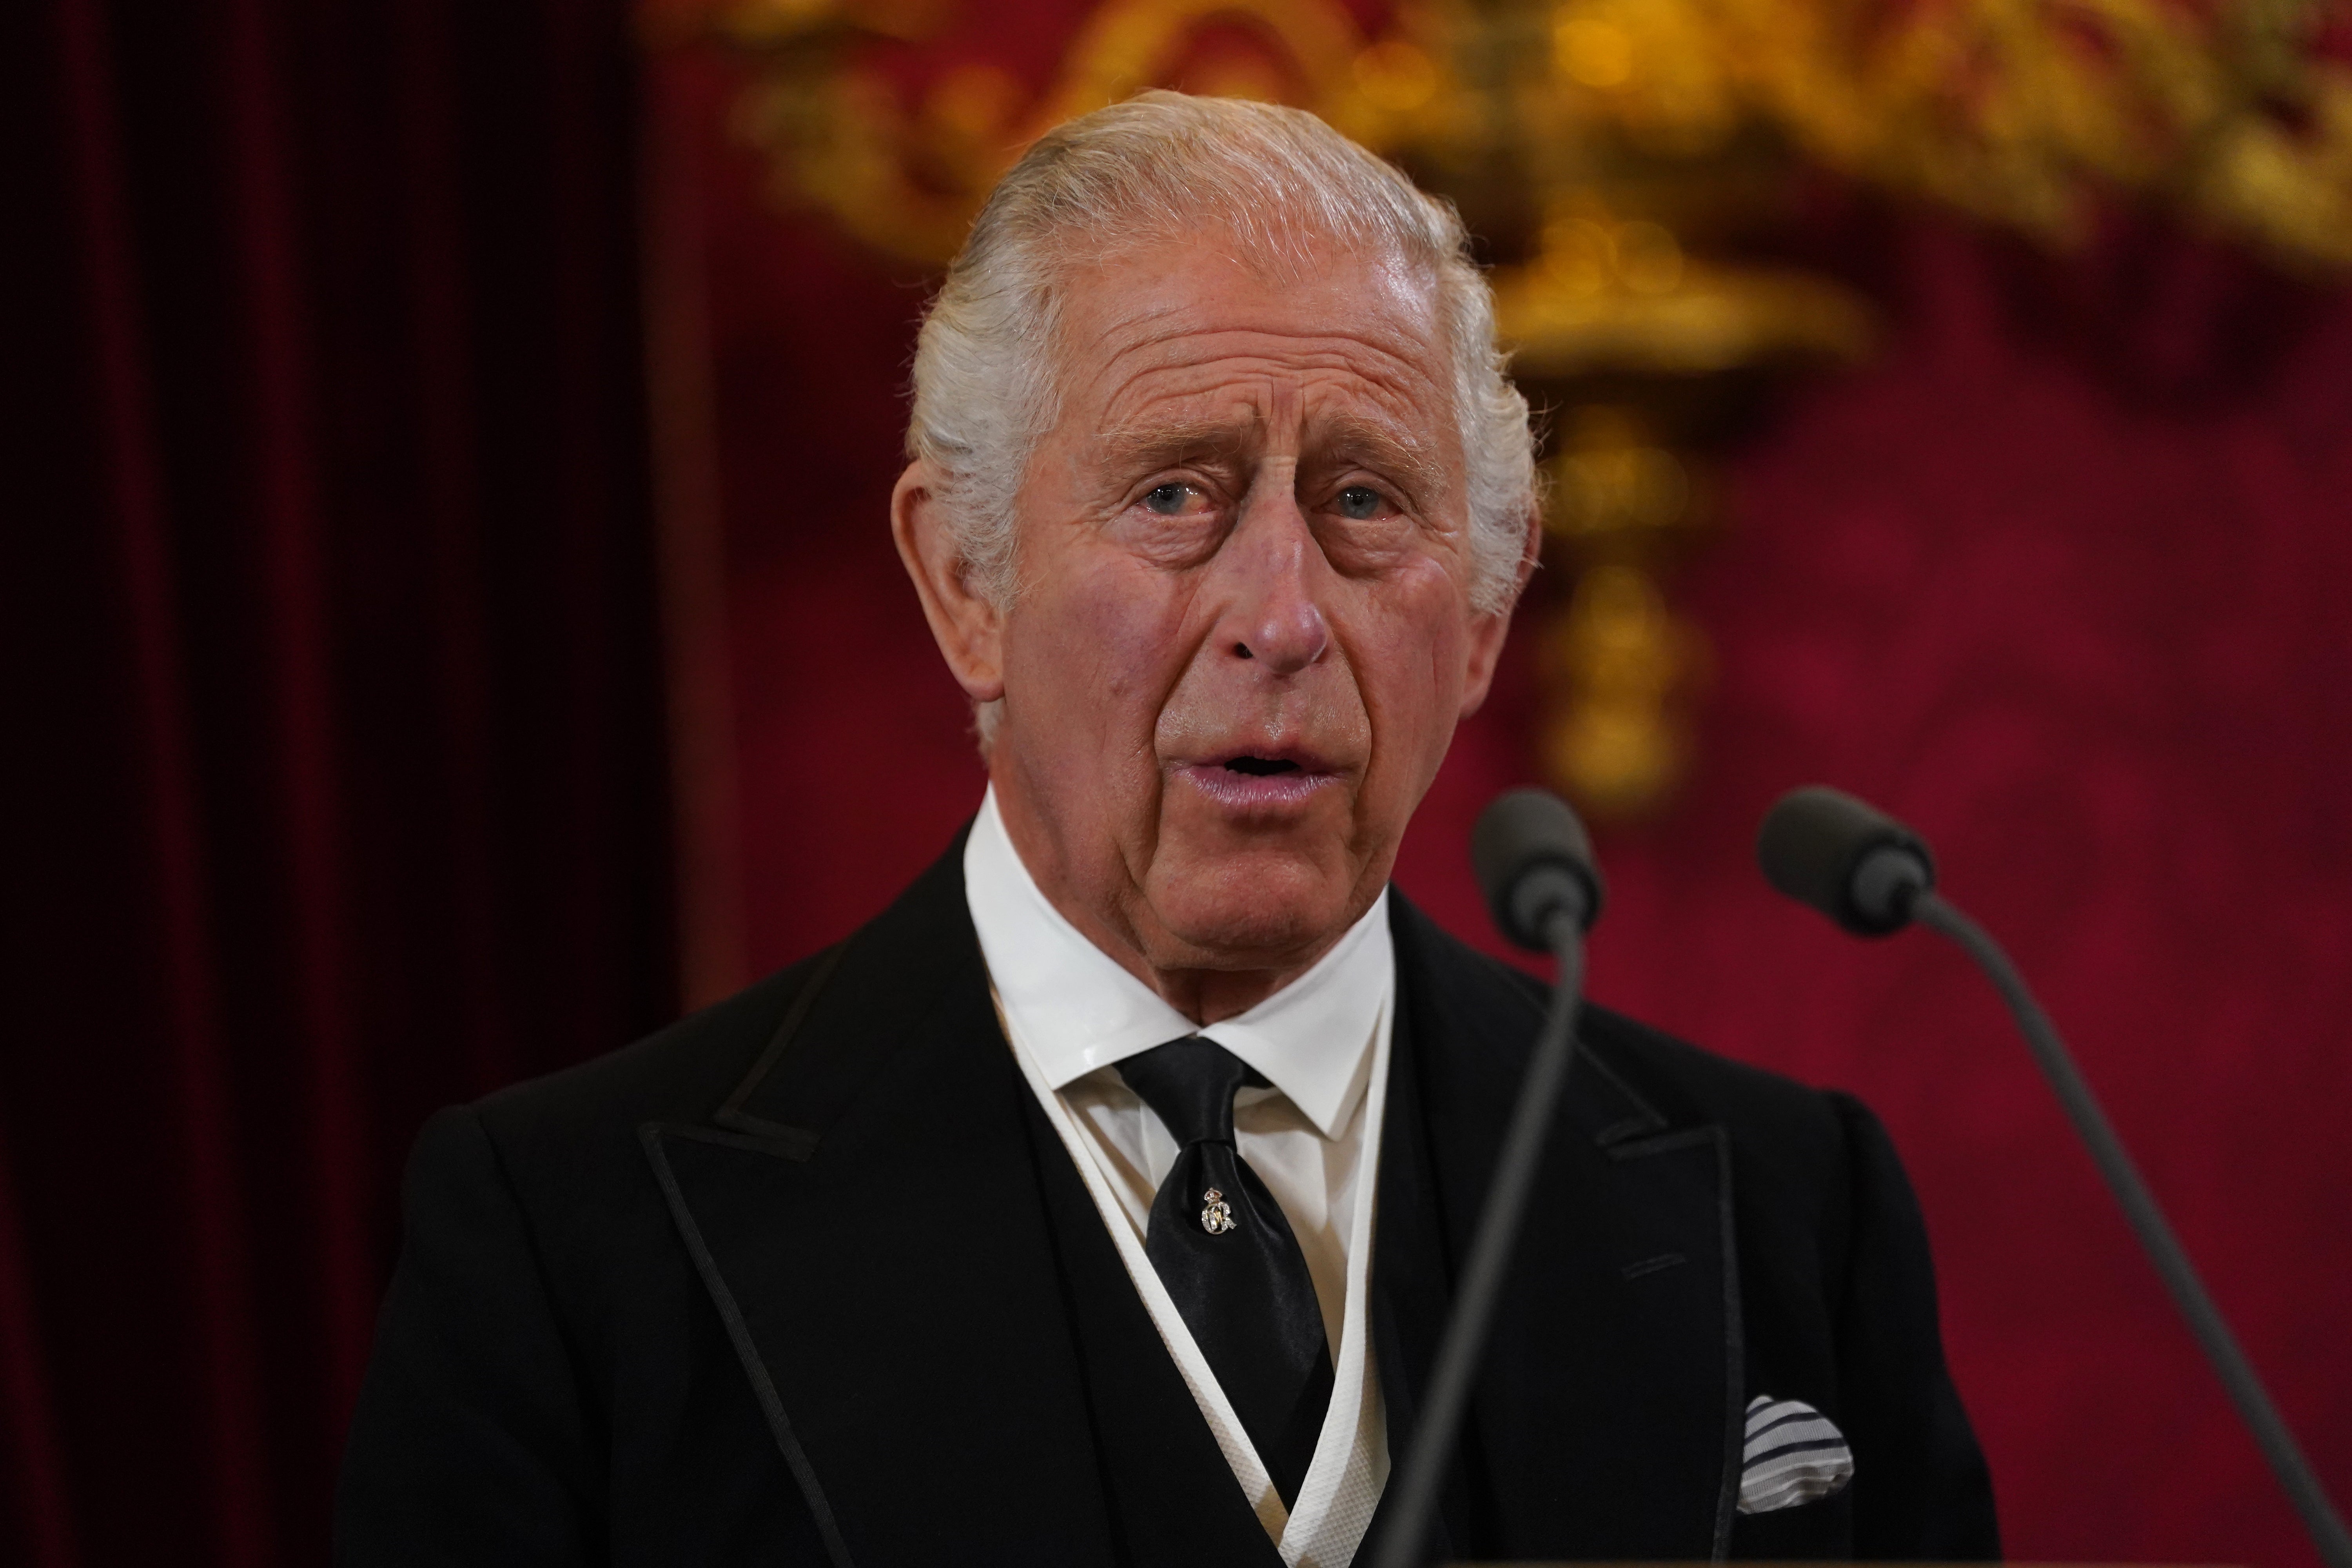 King Charles III during the Accession Council at St James’s Palace (Victoria Jones/PA)